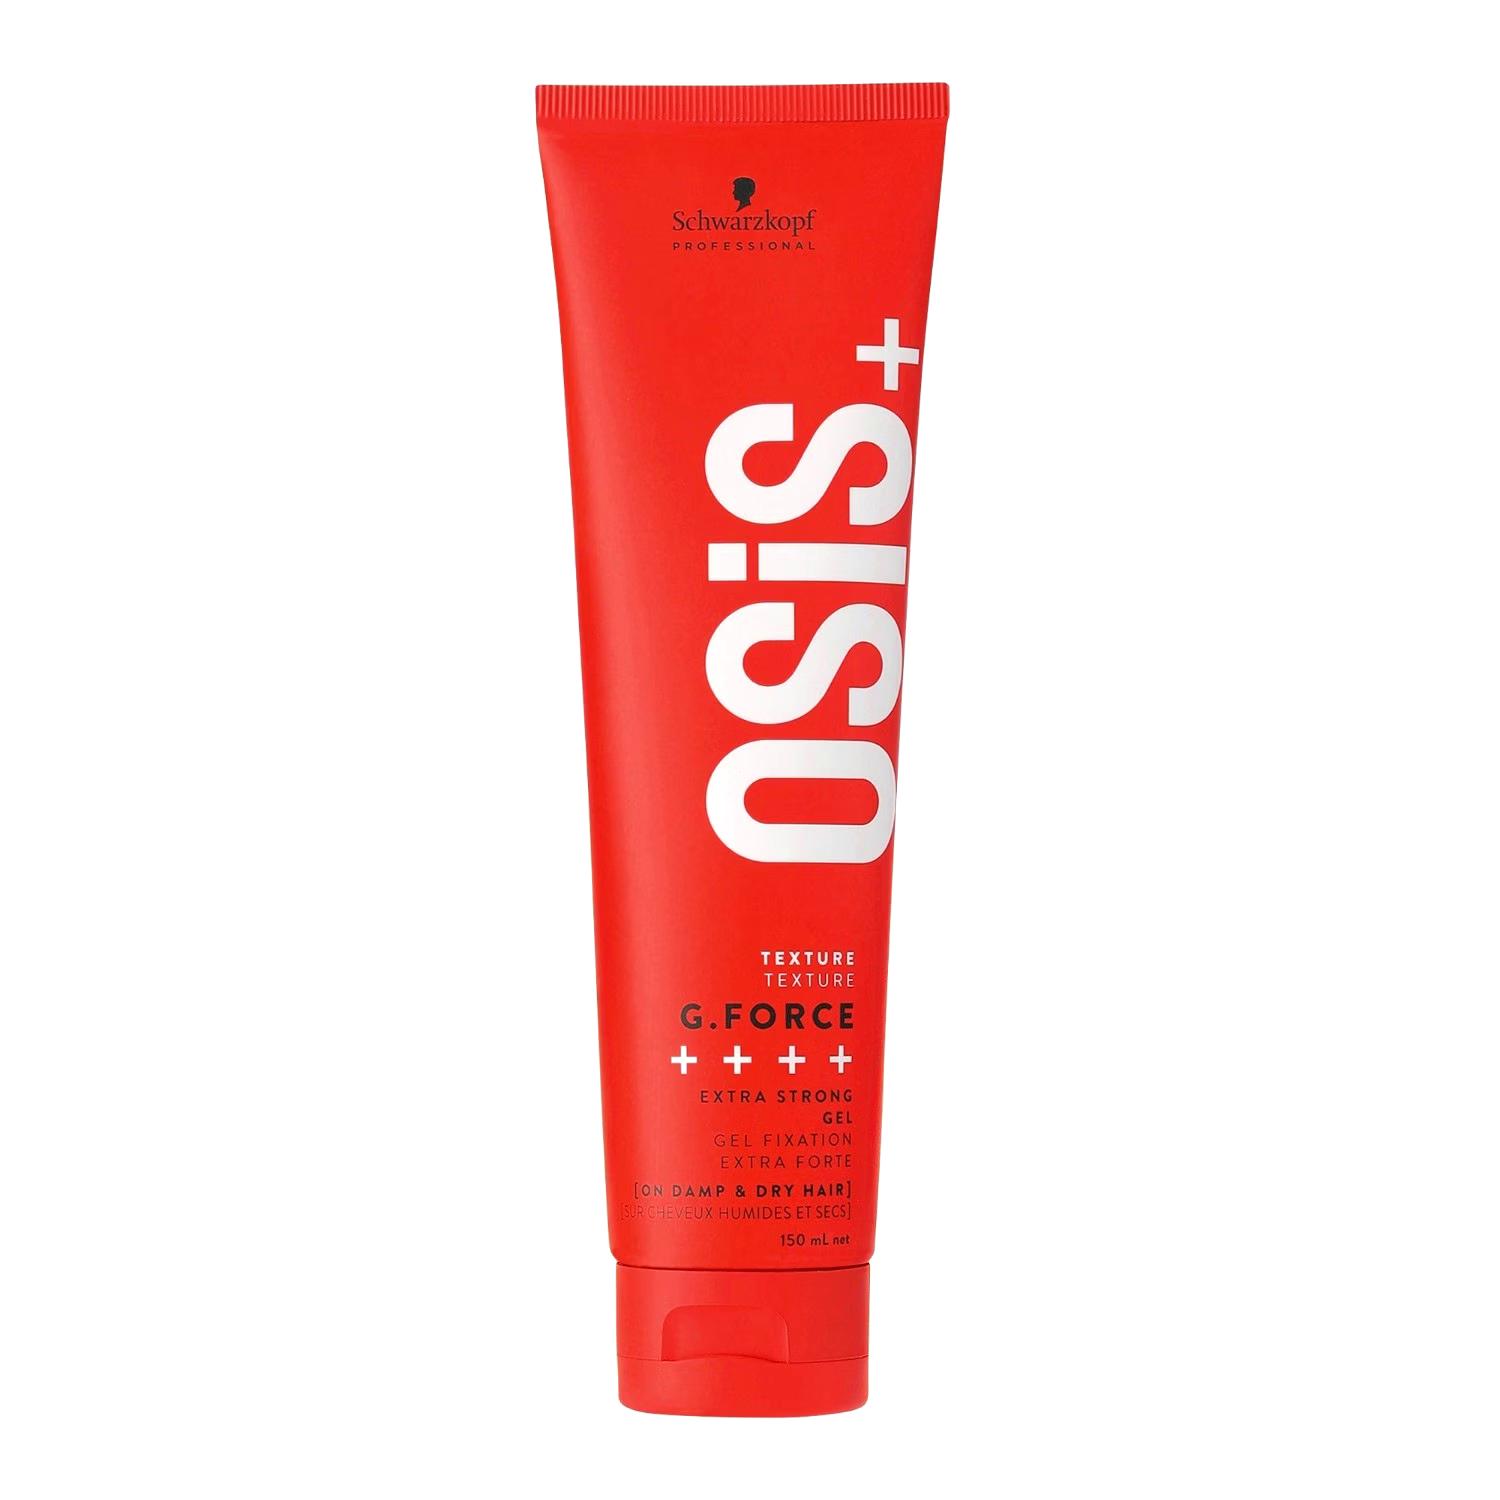 OSIS+ Texture G. Force